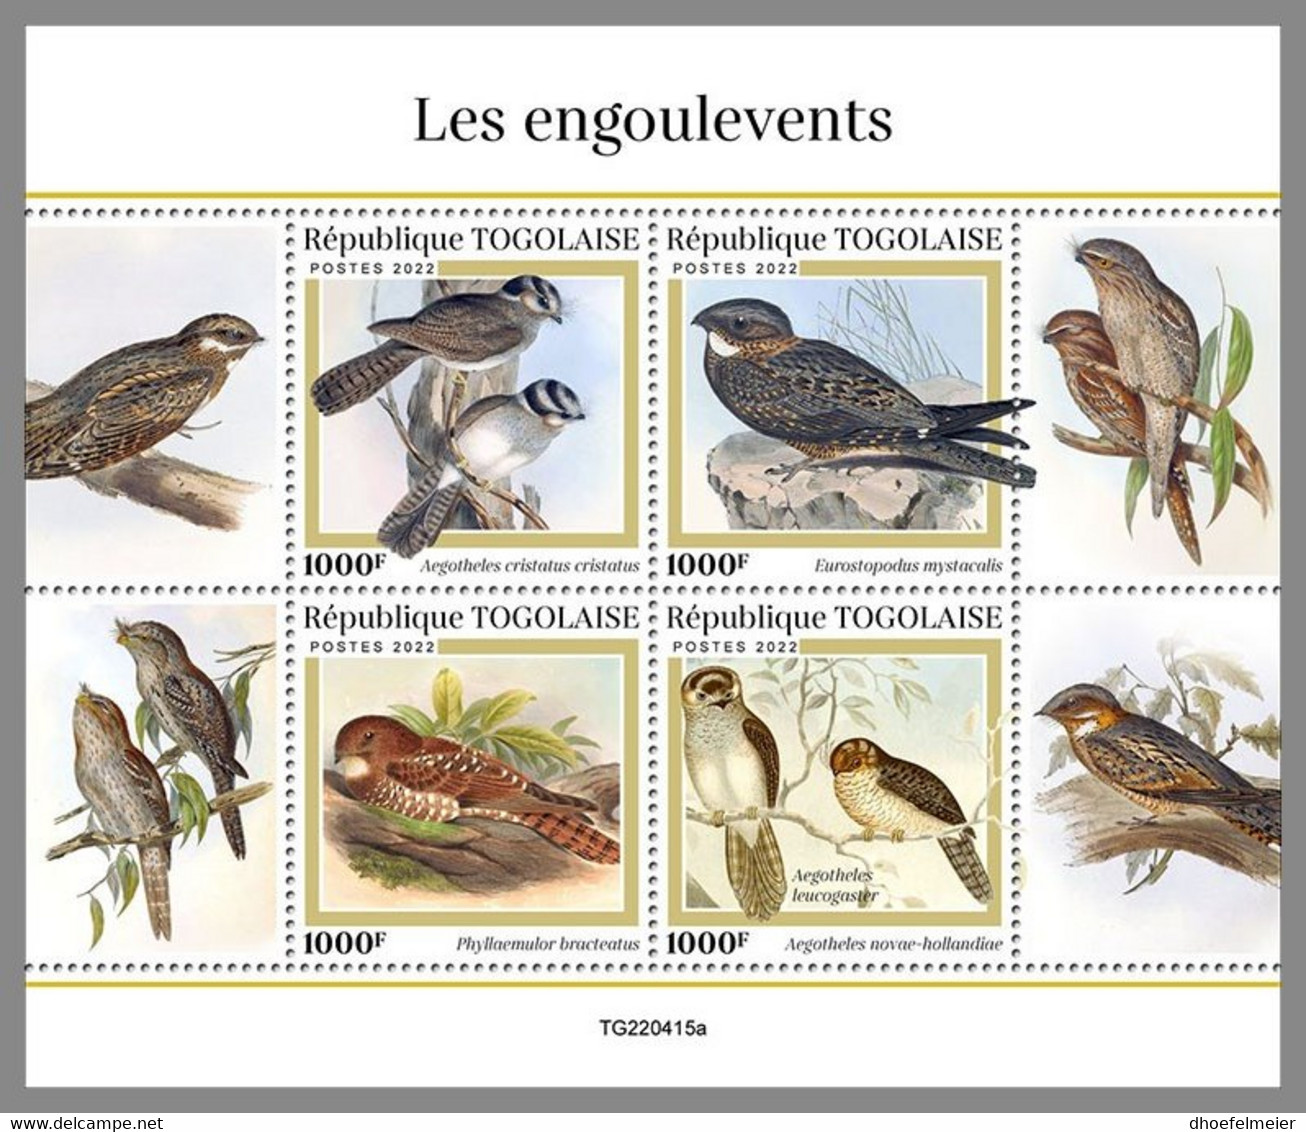 TOGO 2022 MNH Nightjars Nachtschwalben Engoulevents M/S - OFFICIAL ISSUE - DHQ2310 - Golondrinas